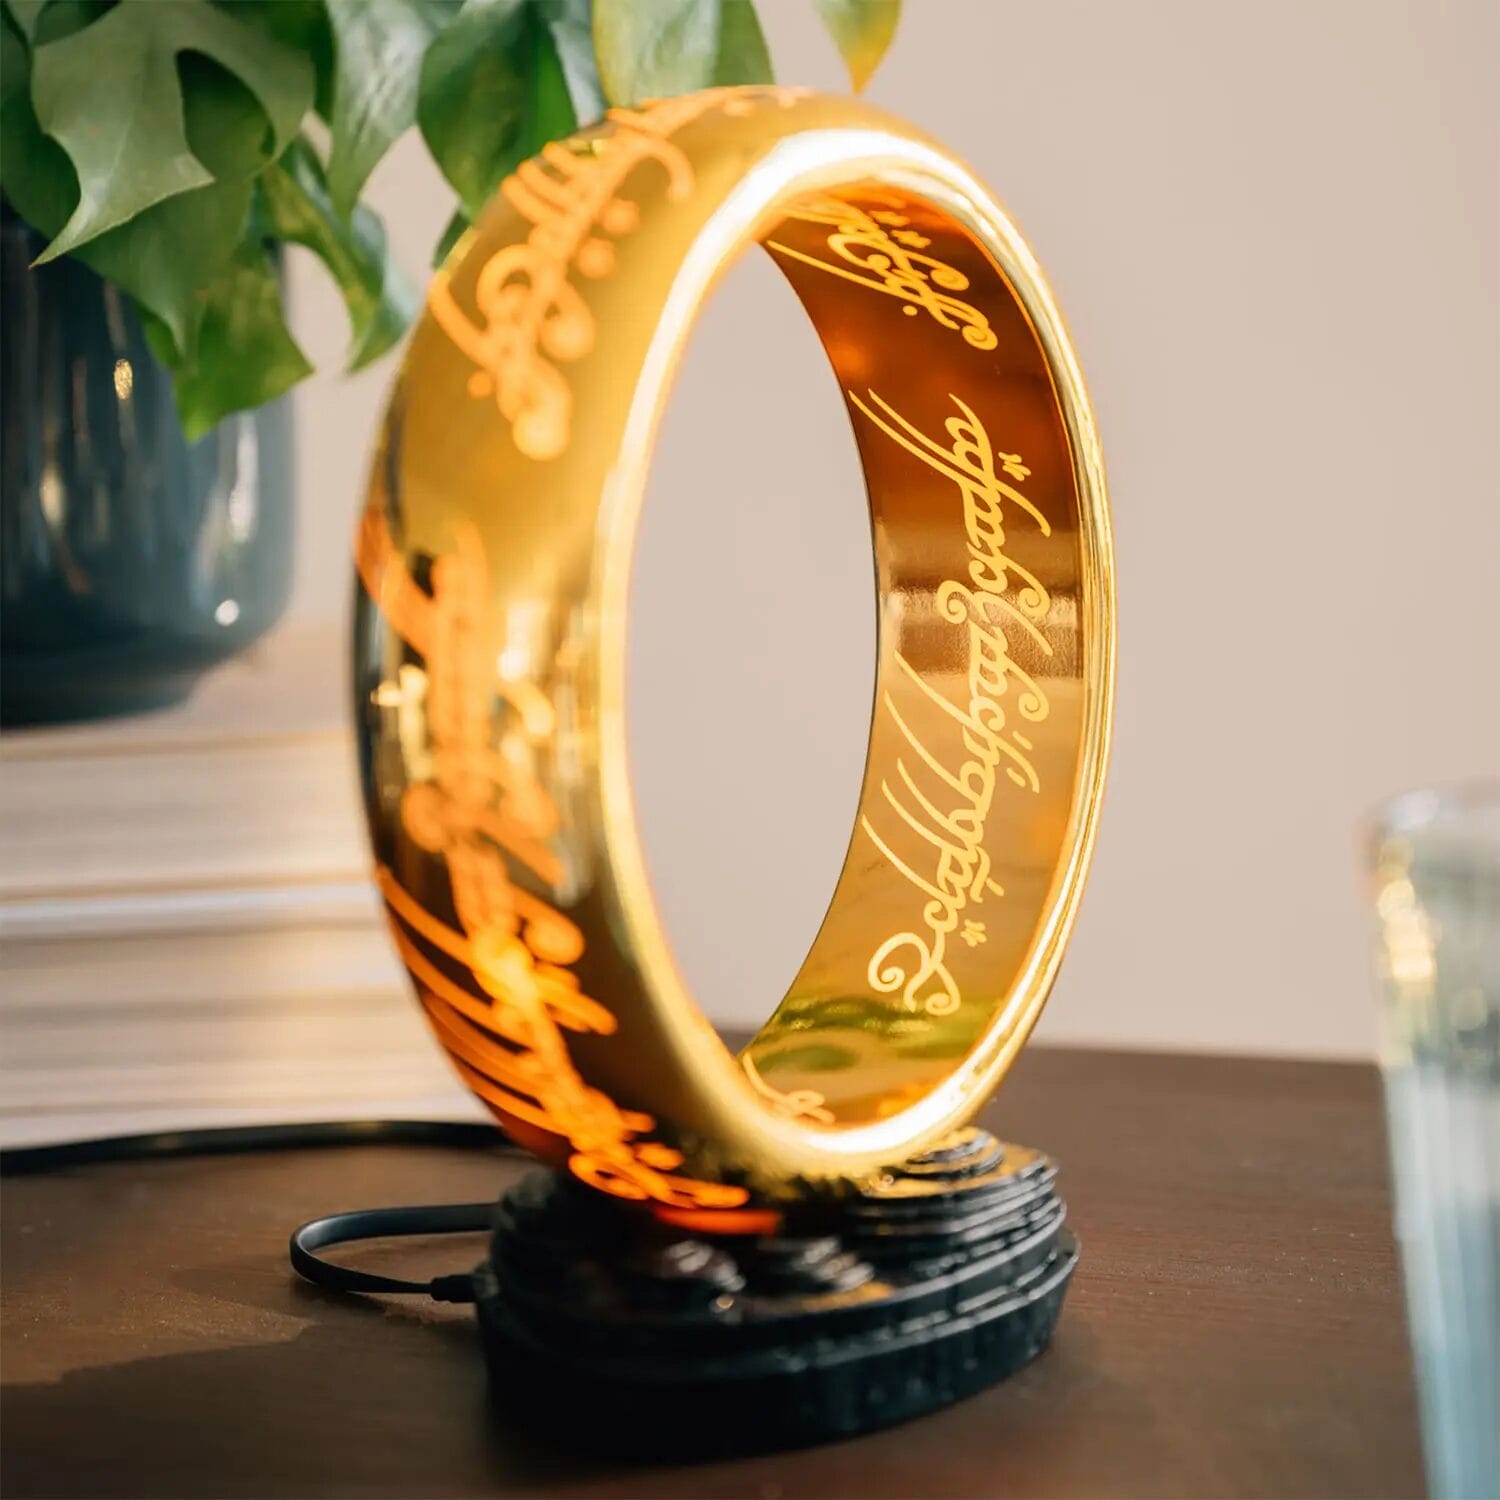 The One Ring lamp